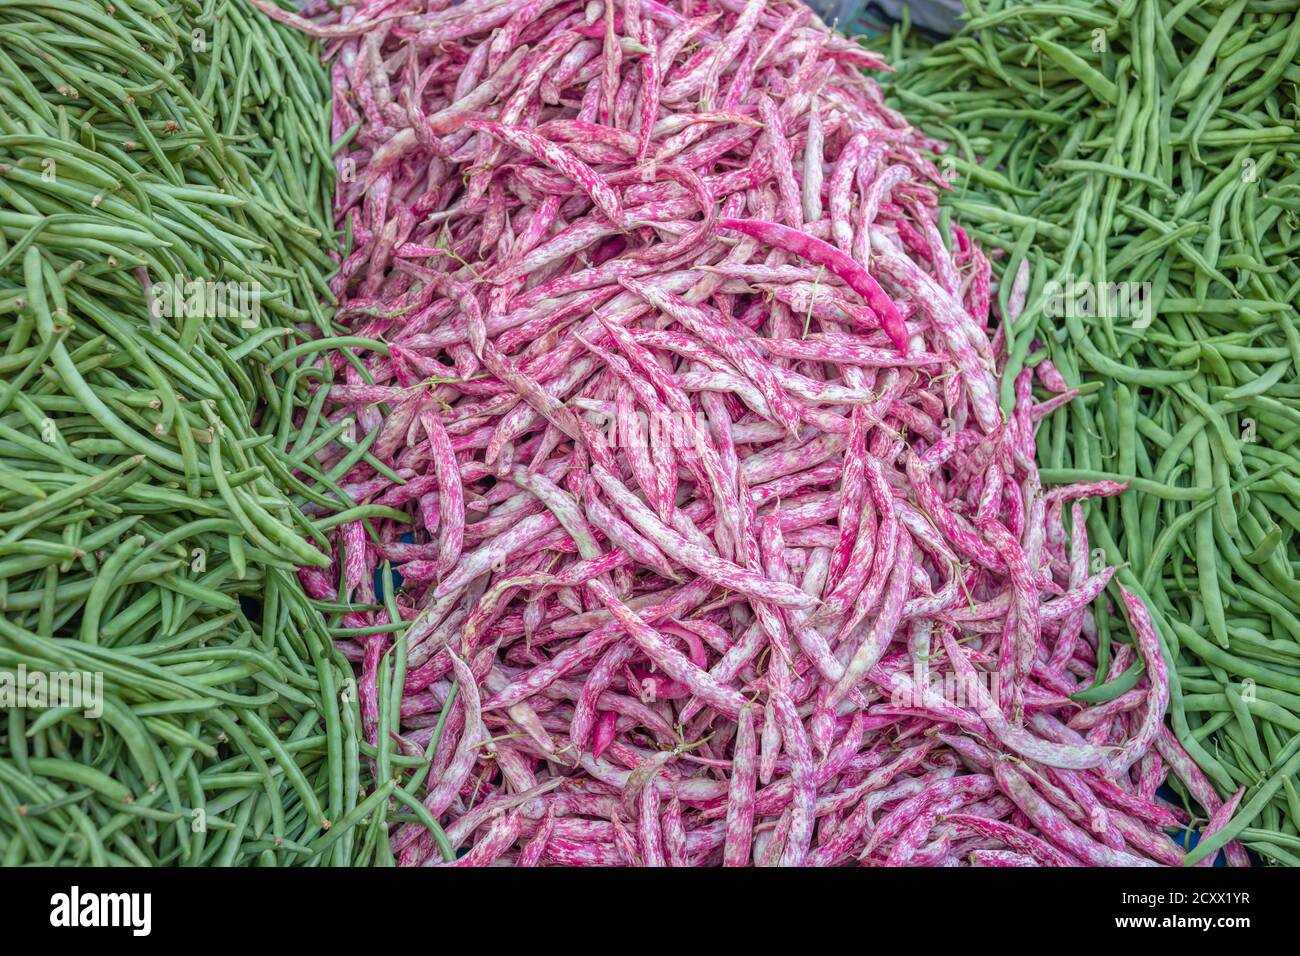 Pink and green colored string beans background. Vegetarian food ingredients  Stock Photo - Alamy